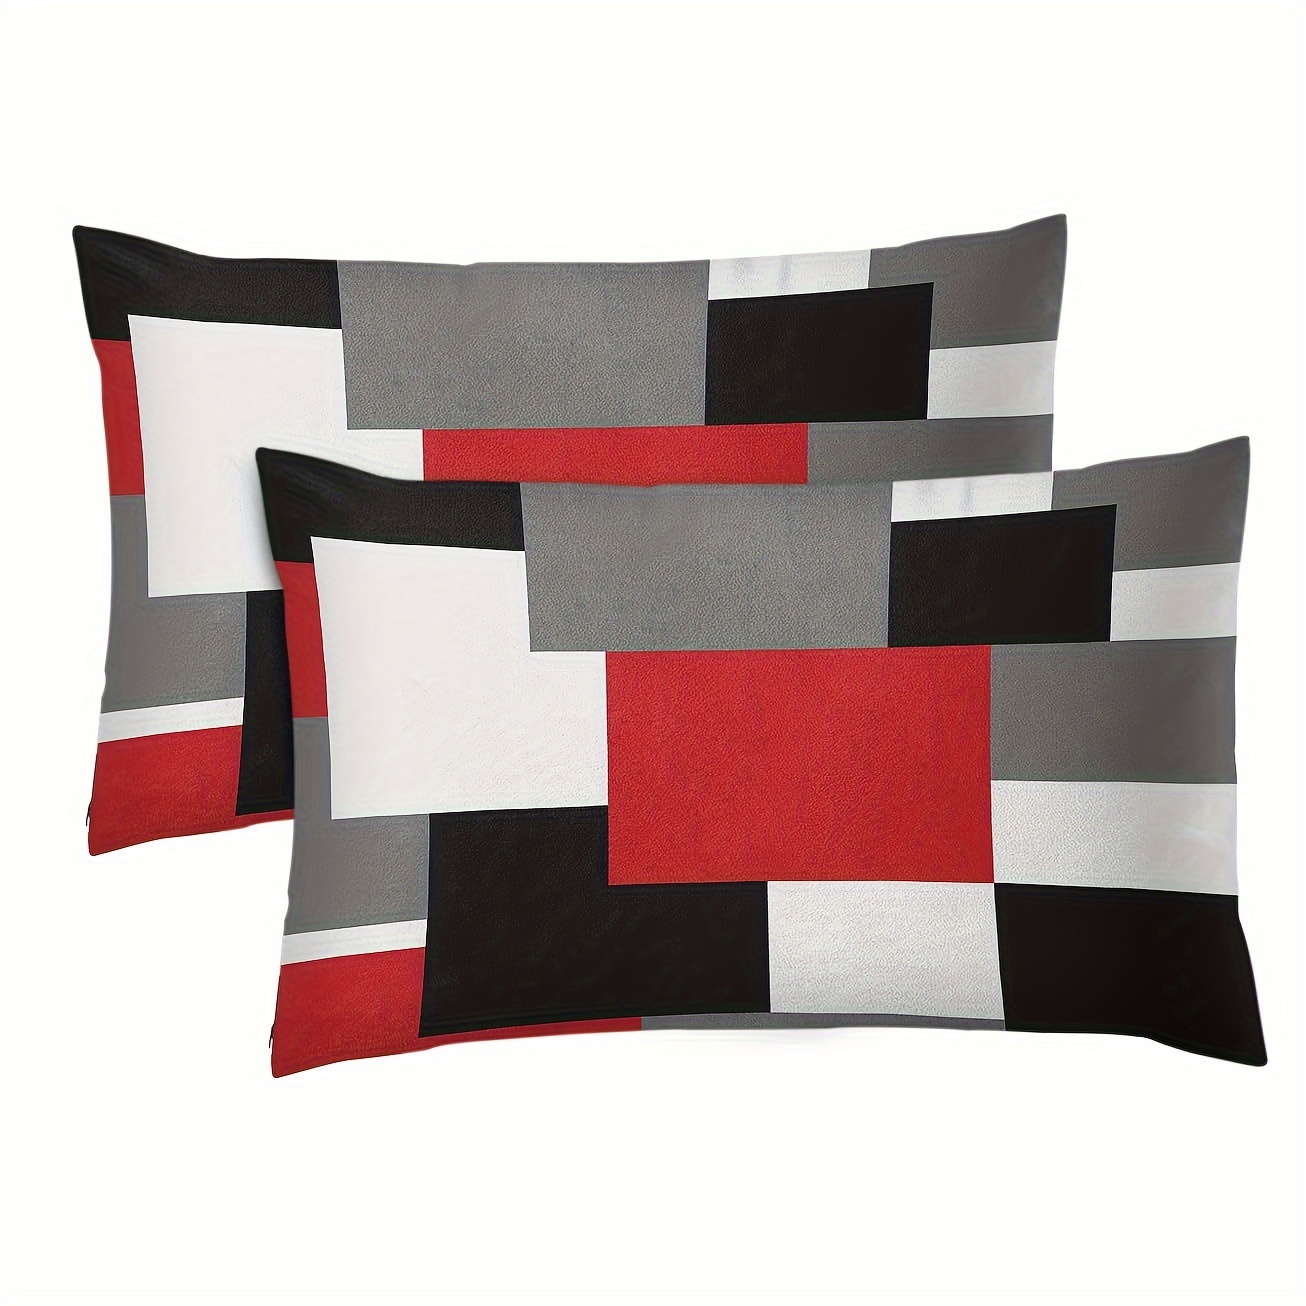 

2pcs Red Black And Grey Short Plush Throw Pillow Covers Geometric Modern Abstract Painting Decorative Pillow Cases Home Decor Standard Rectangle, No Pillow Insert, 12 X 20 Inch